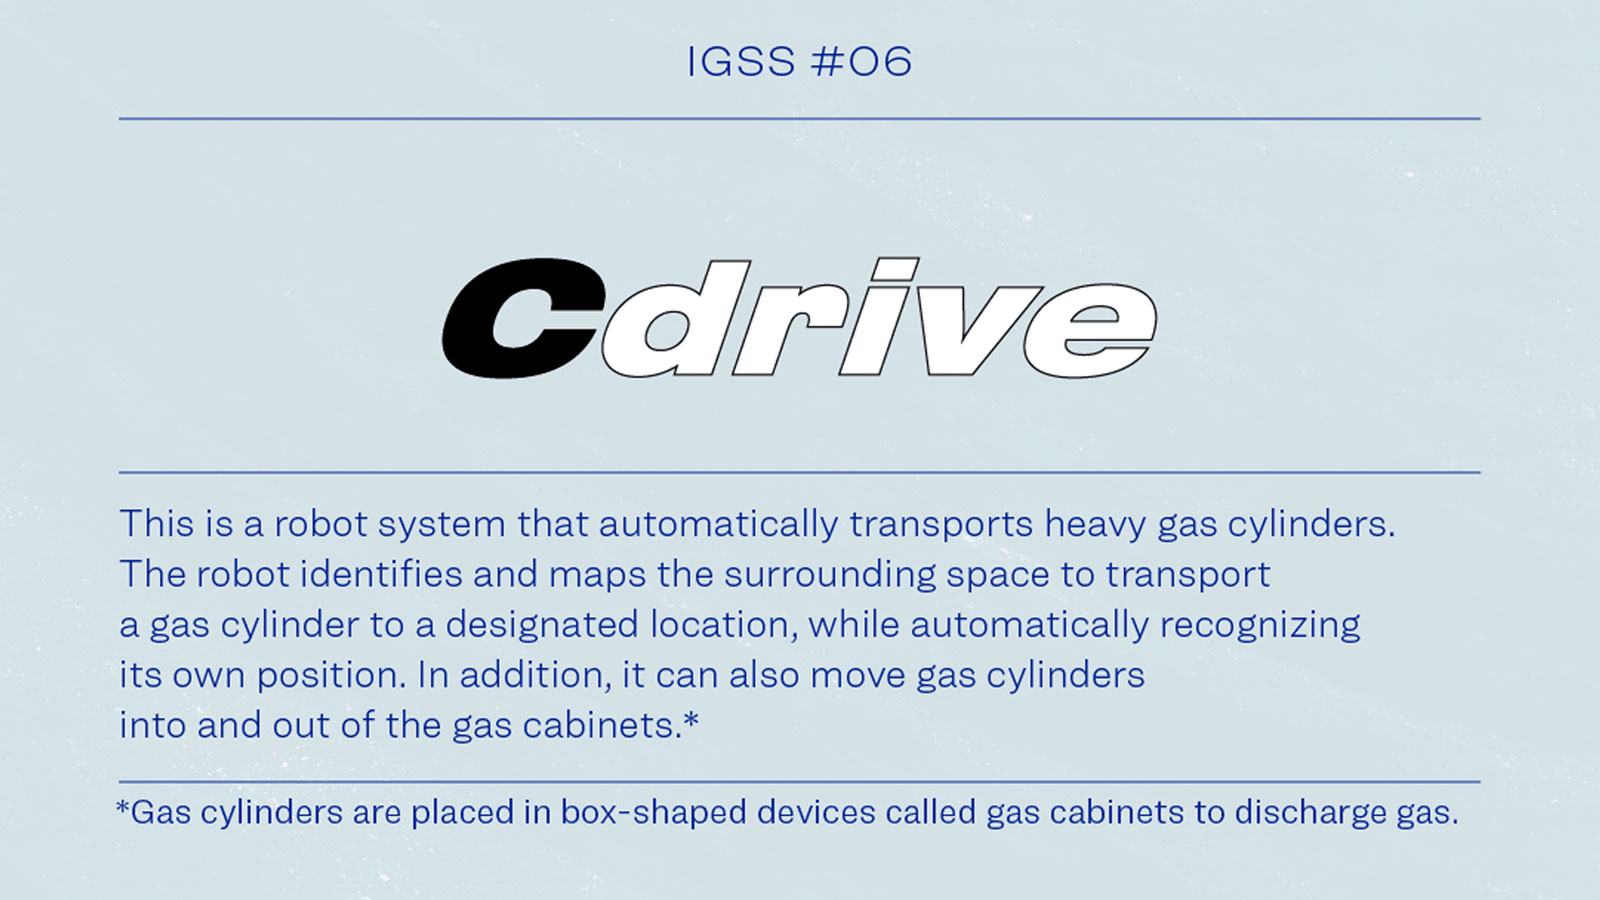 IGSS #06 Cdrive This is a robot system that automatically transports heavy cylinders.THe robot identifies and maps the surrounding space to transport a gas cylinder to a designated location, while automatically recognizing its own position, In addition, it can also move cylinders into and out of the gas cabinets.* * Gas cylinders are placed in box-shaped devices called gas cabinets to discharge gas.